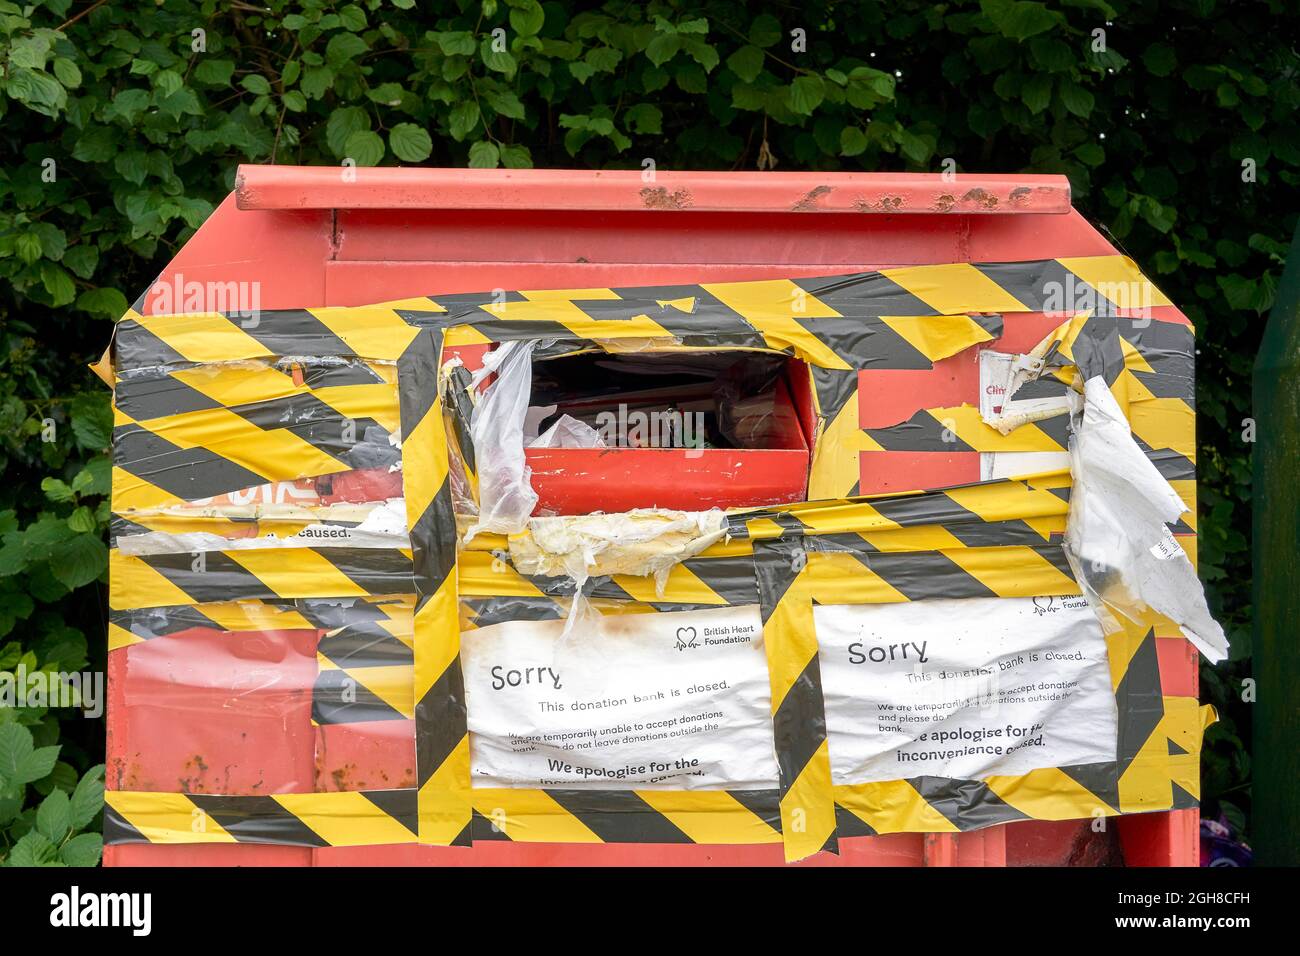 Charity recycling bin closed for donations and wrapped in black and yellow hazard warning tape Stock Photo